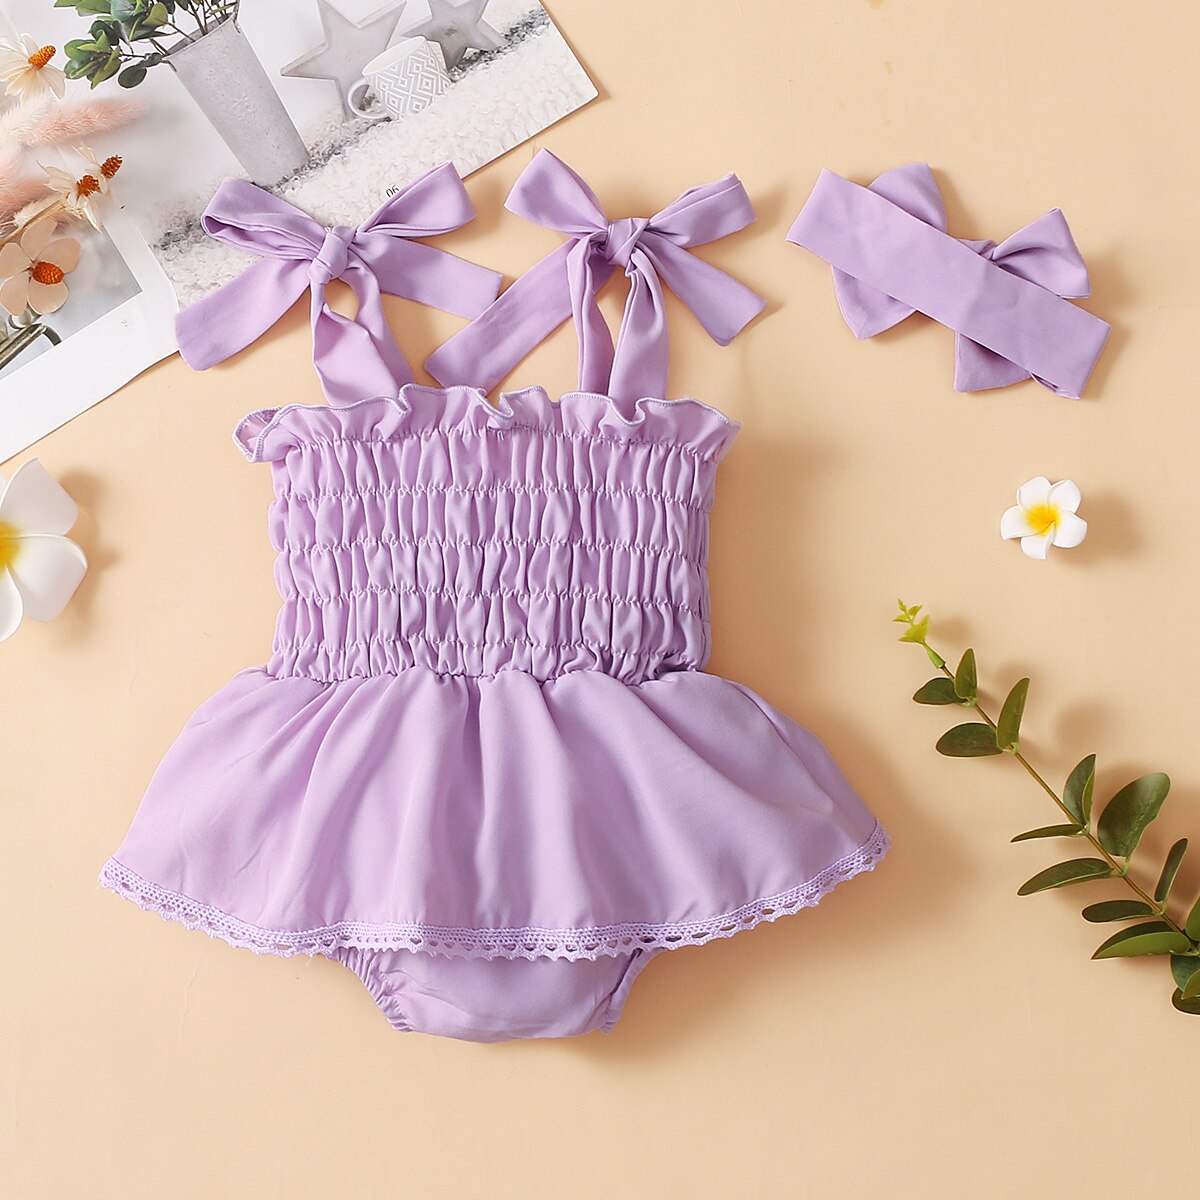 Infant-Newborn-Baby-Girls-Bodysuits-Dress-Elastic-Solid-Bowknot-Strap-Jumpsuit-Summer-Outfits-Tutu-Outfits-With-4